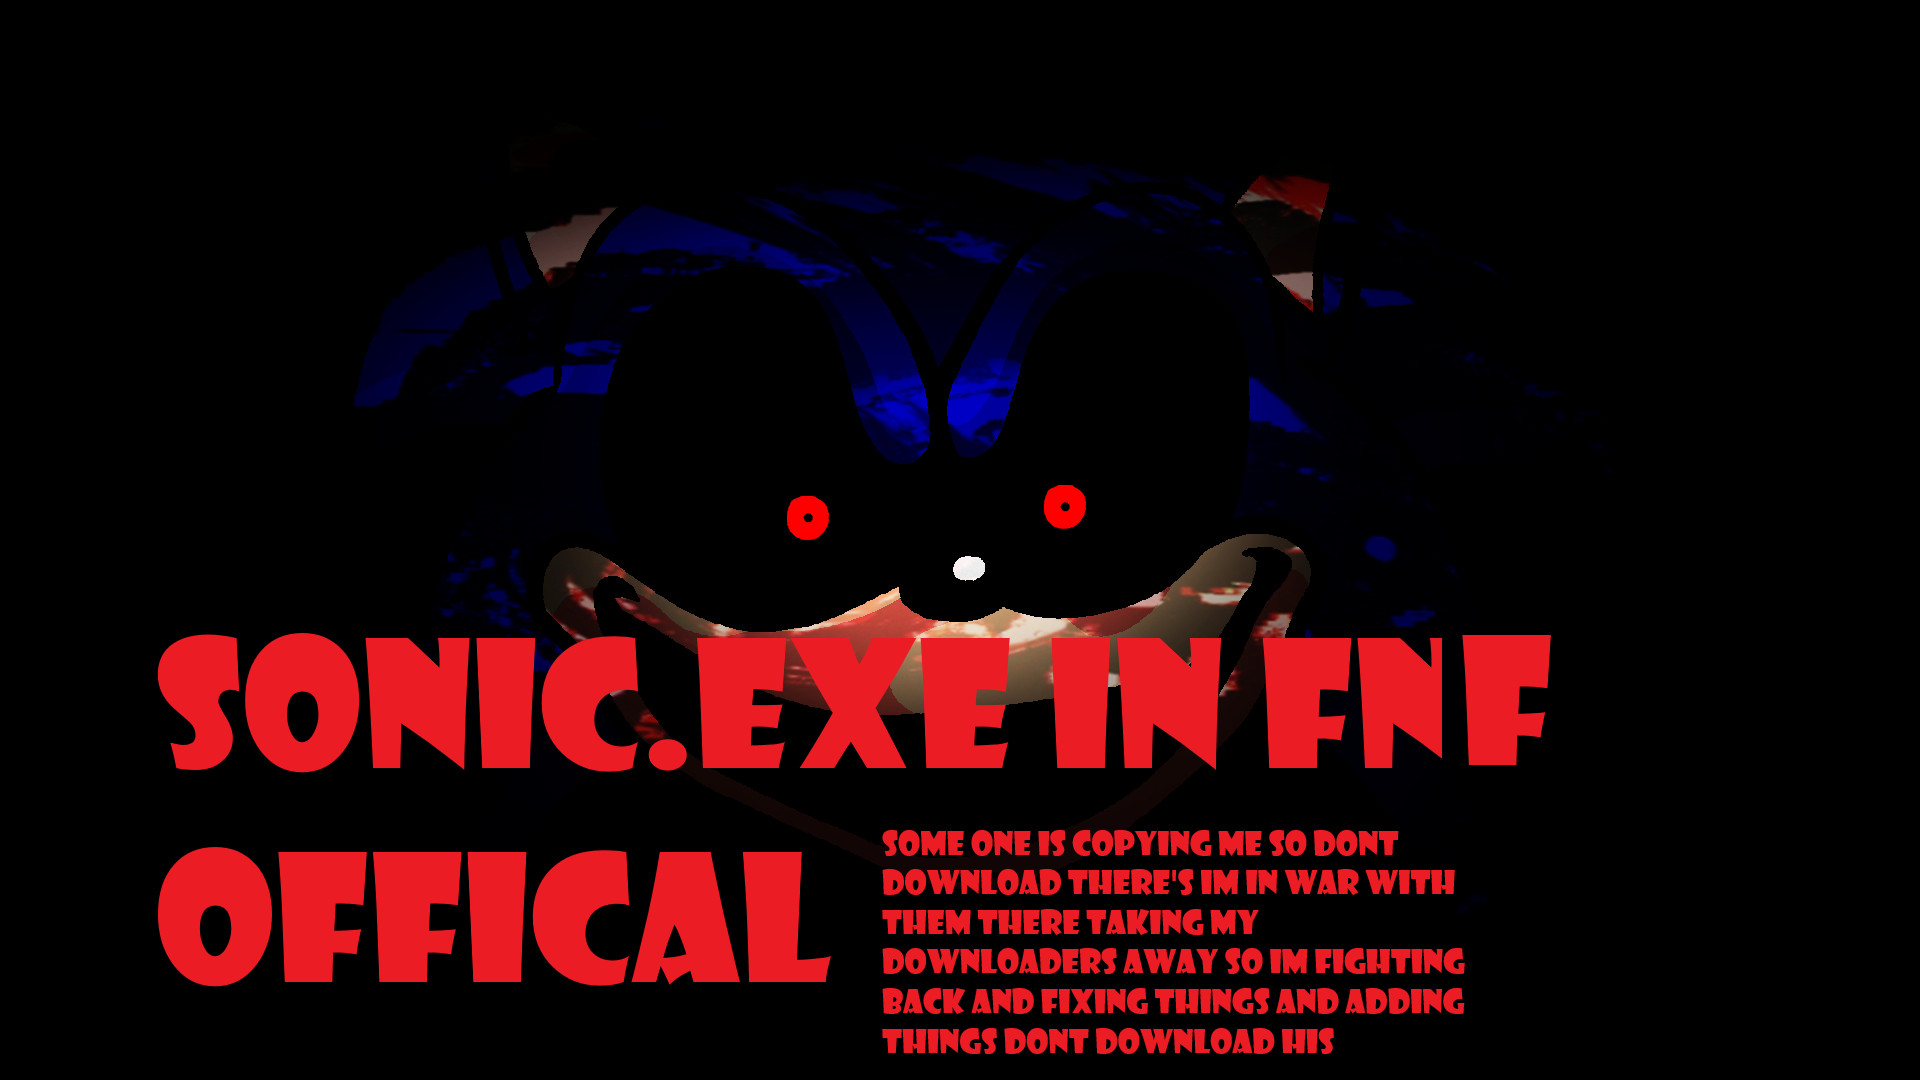 SONIC.EXE IS BACK FOR MORE!!! Friday Night Funkin' VS SONIC.EXE